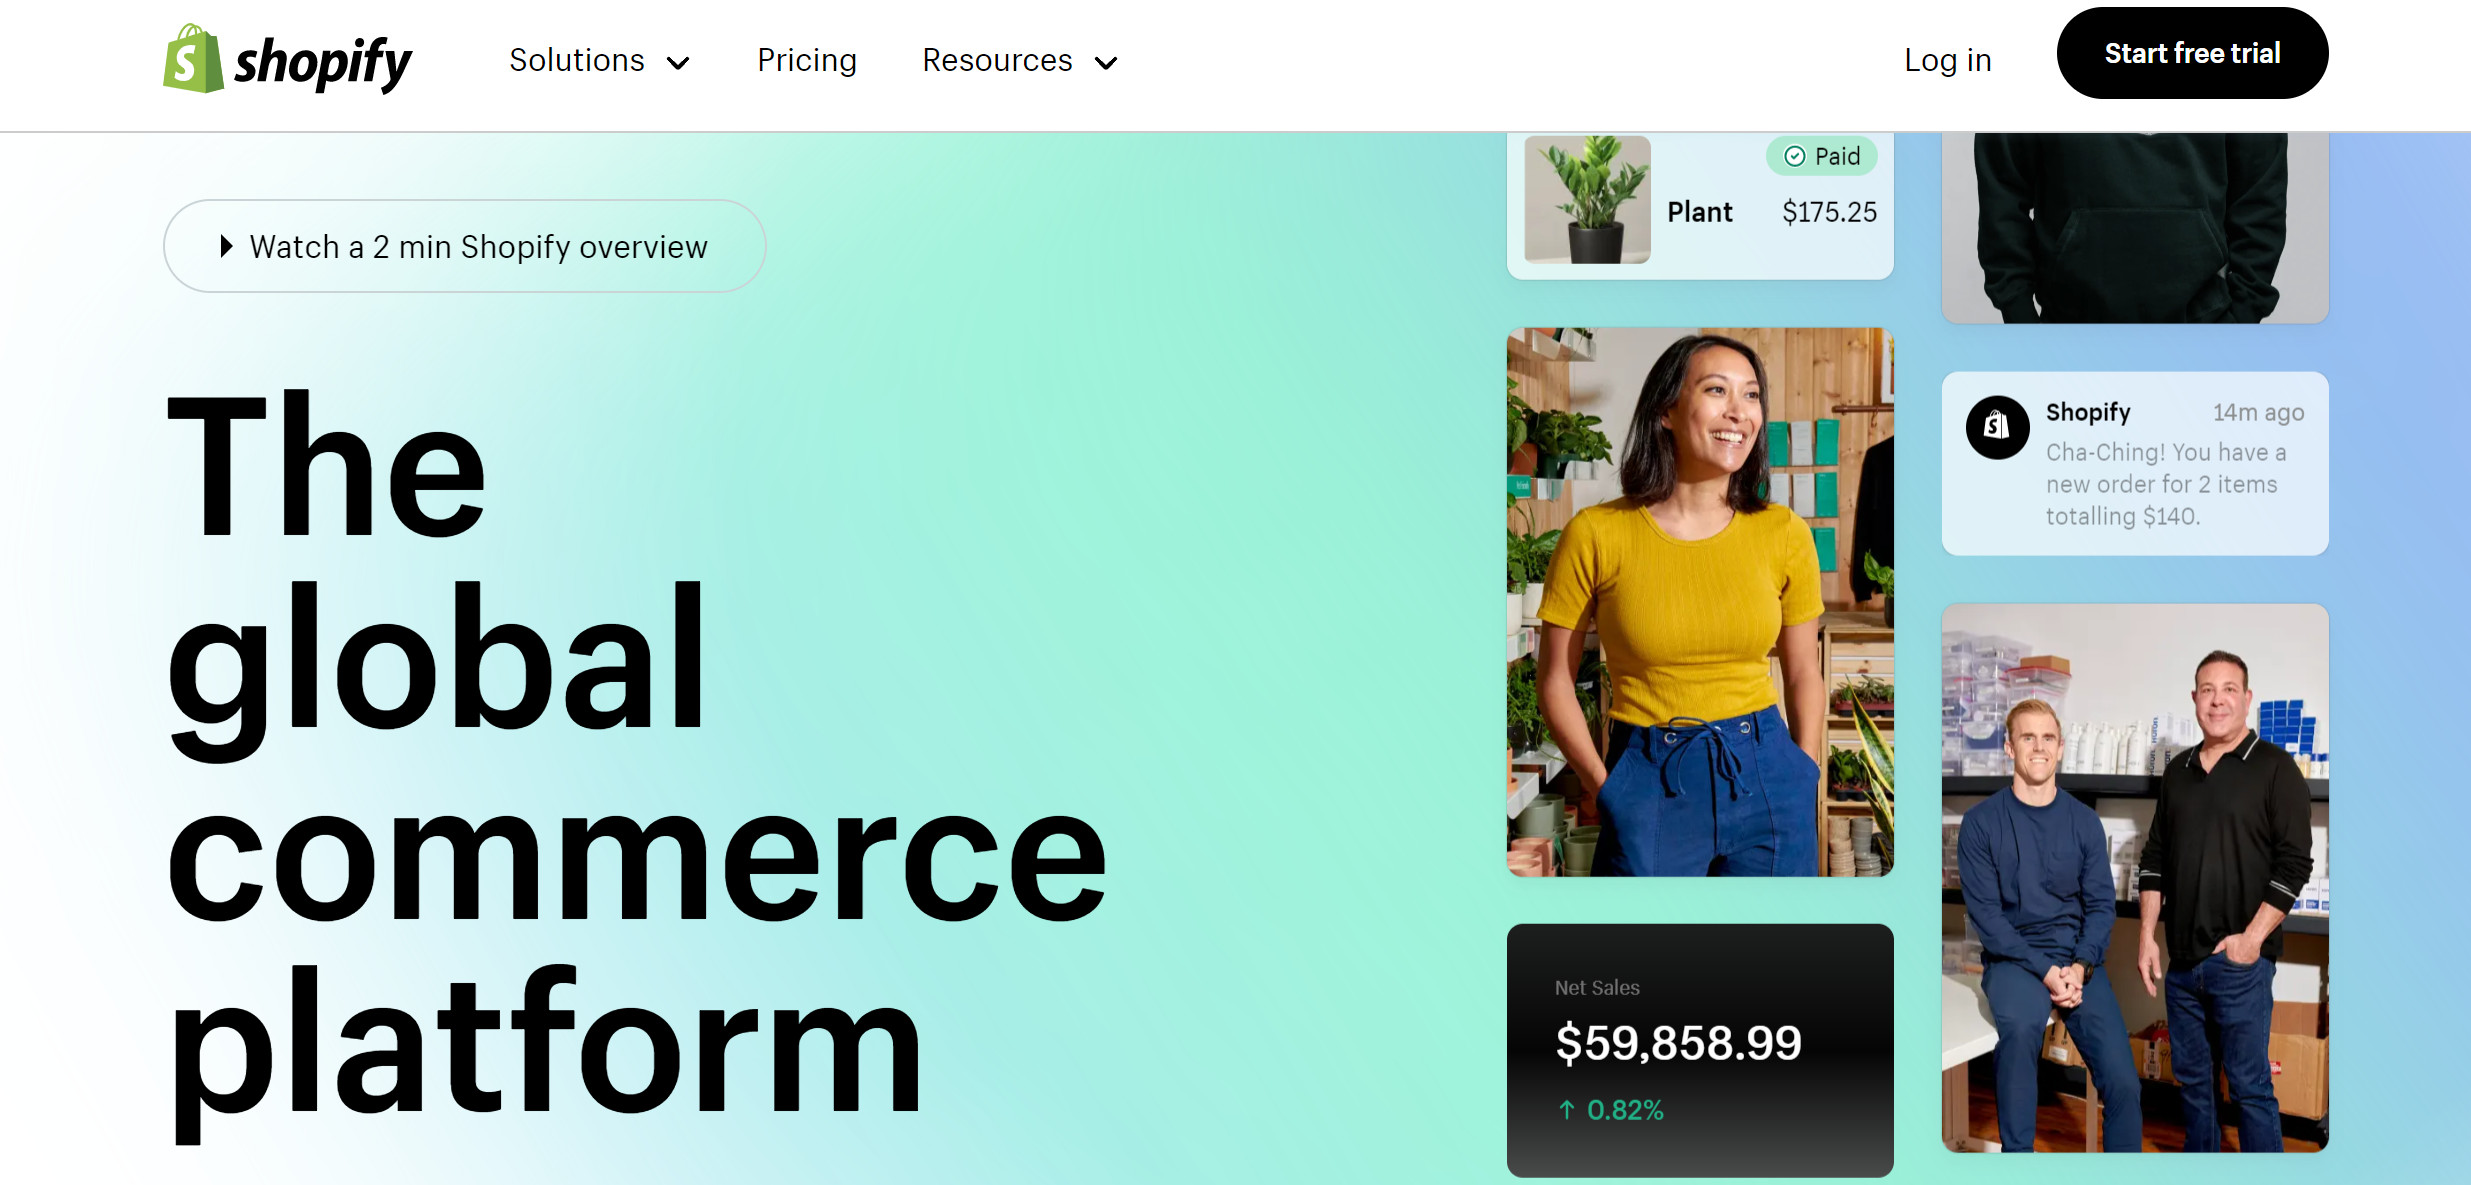 Shopify-SaaS platform to build ecommerce website in Singapore